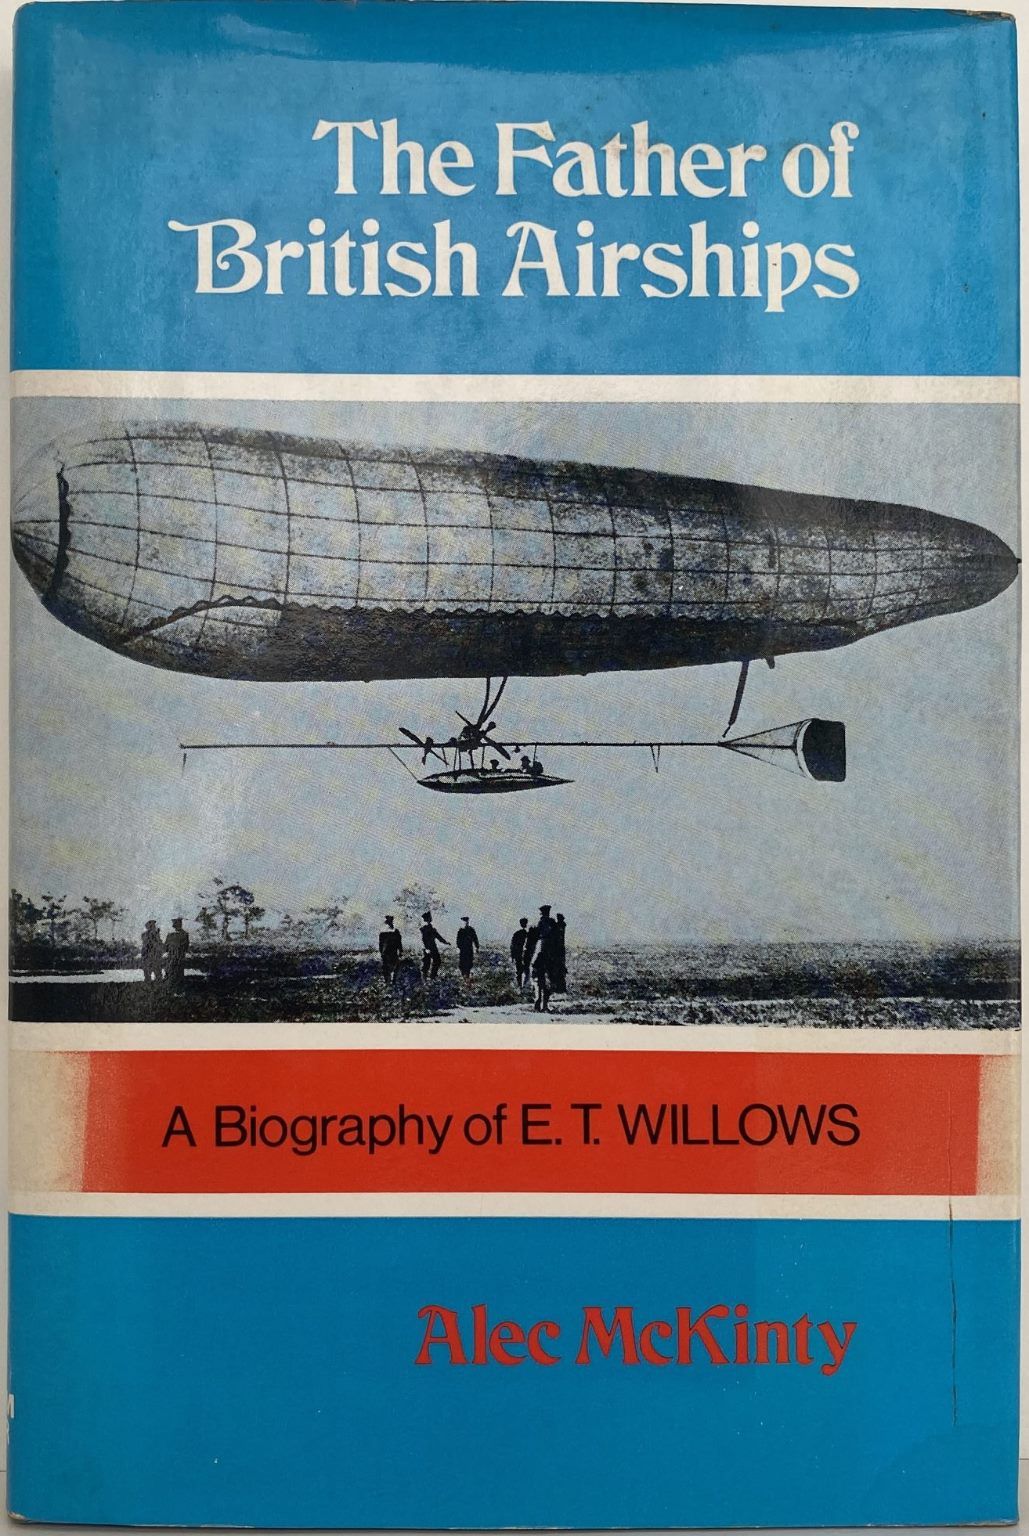 THE FATHER OF BRITISH AIRSHIPS: Biography of E.T. Williams